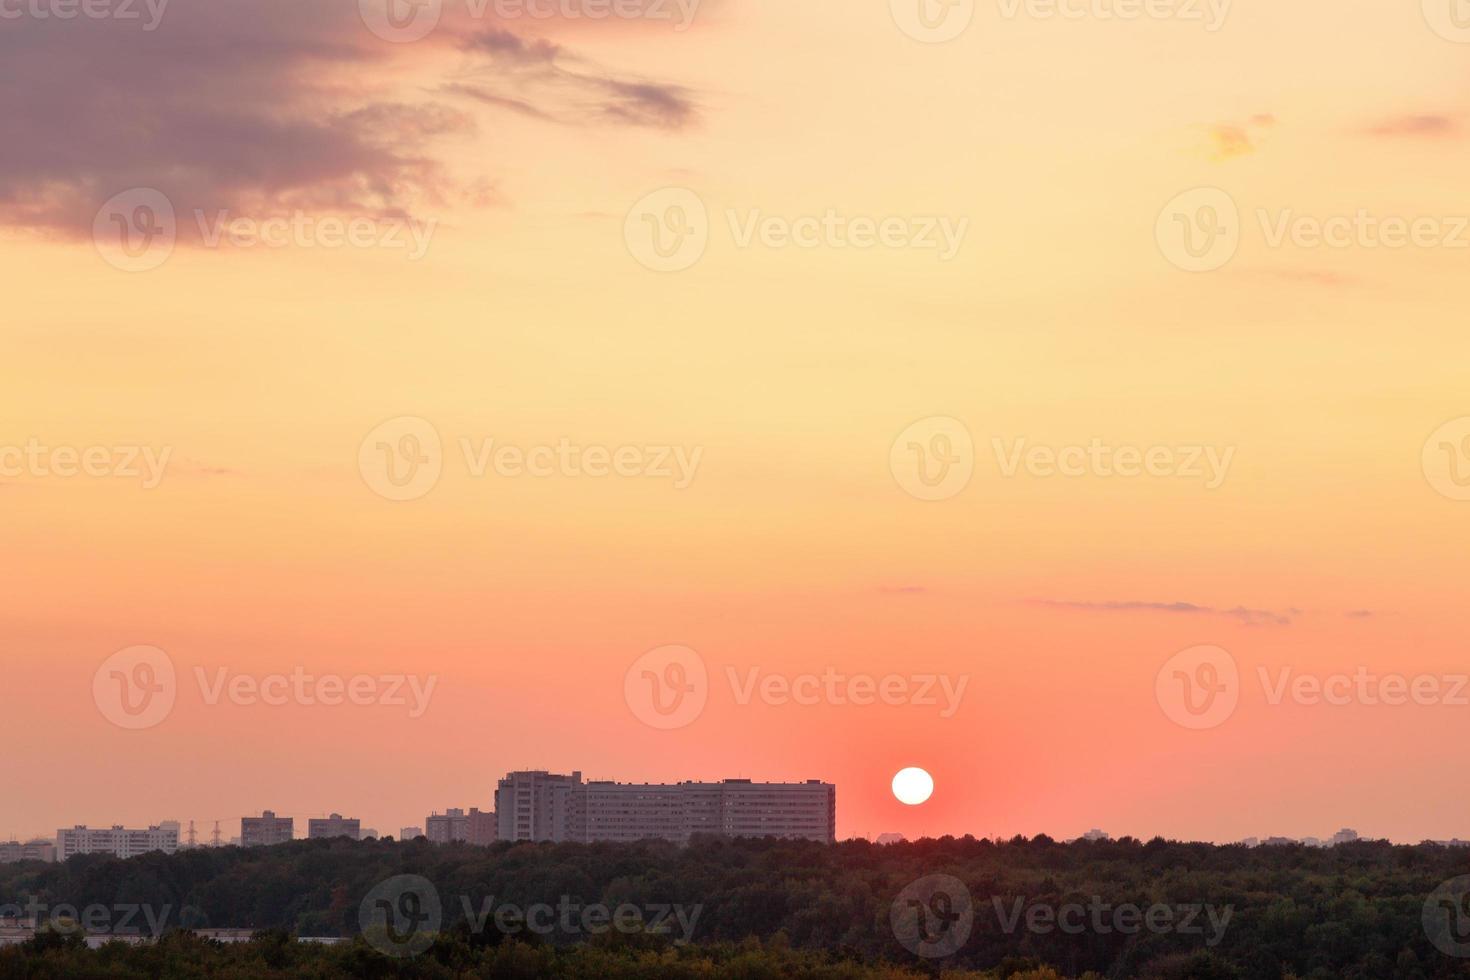 sun above horizon during red sunrise over city photo